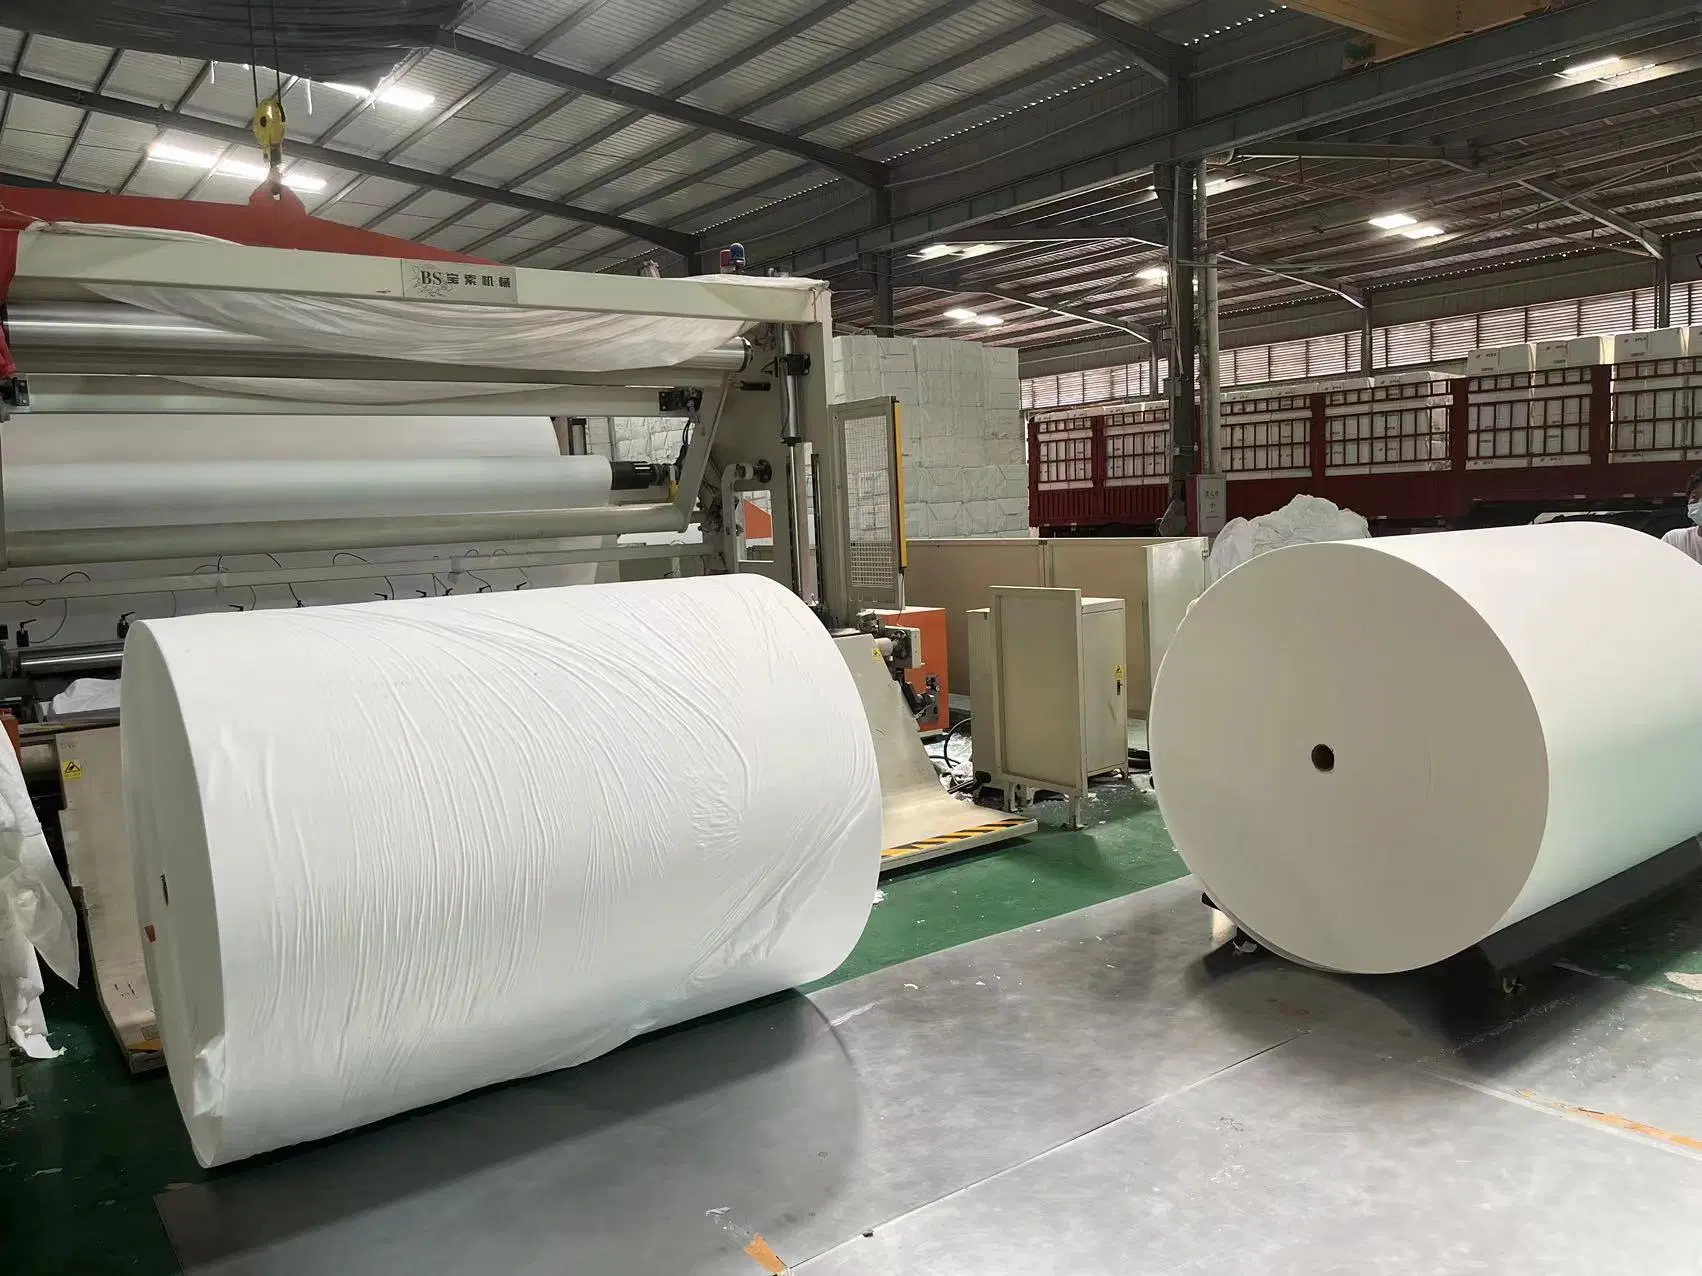 100% Virgin Wood Pulp Jumbo Roll Raw Material for Toilet Tissue